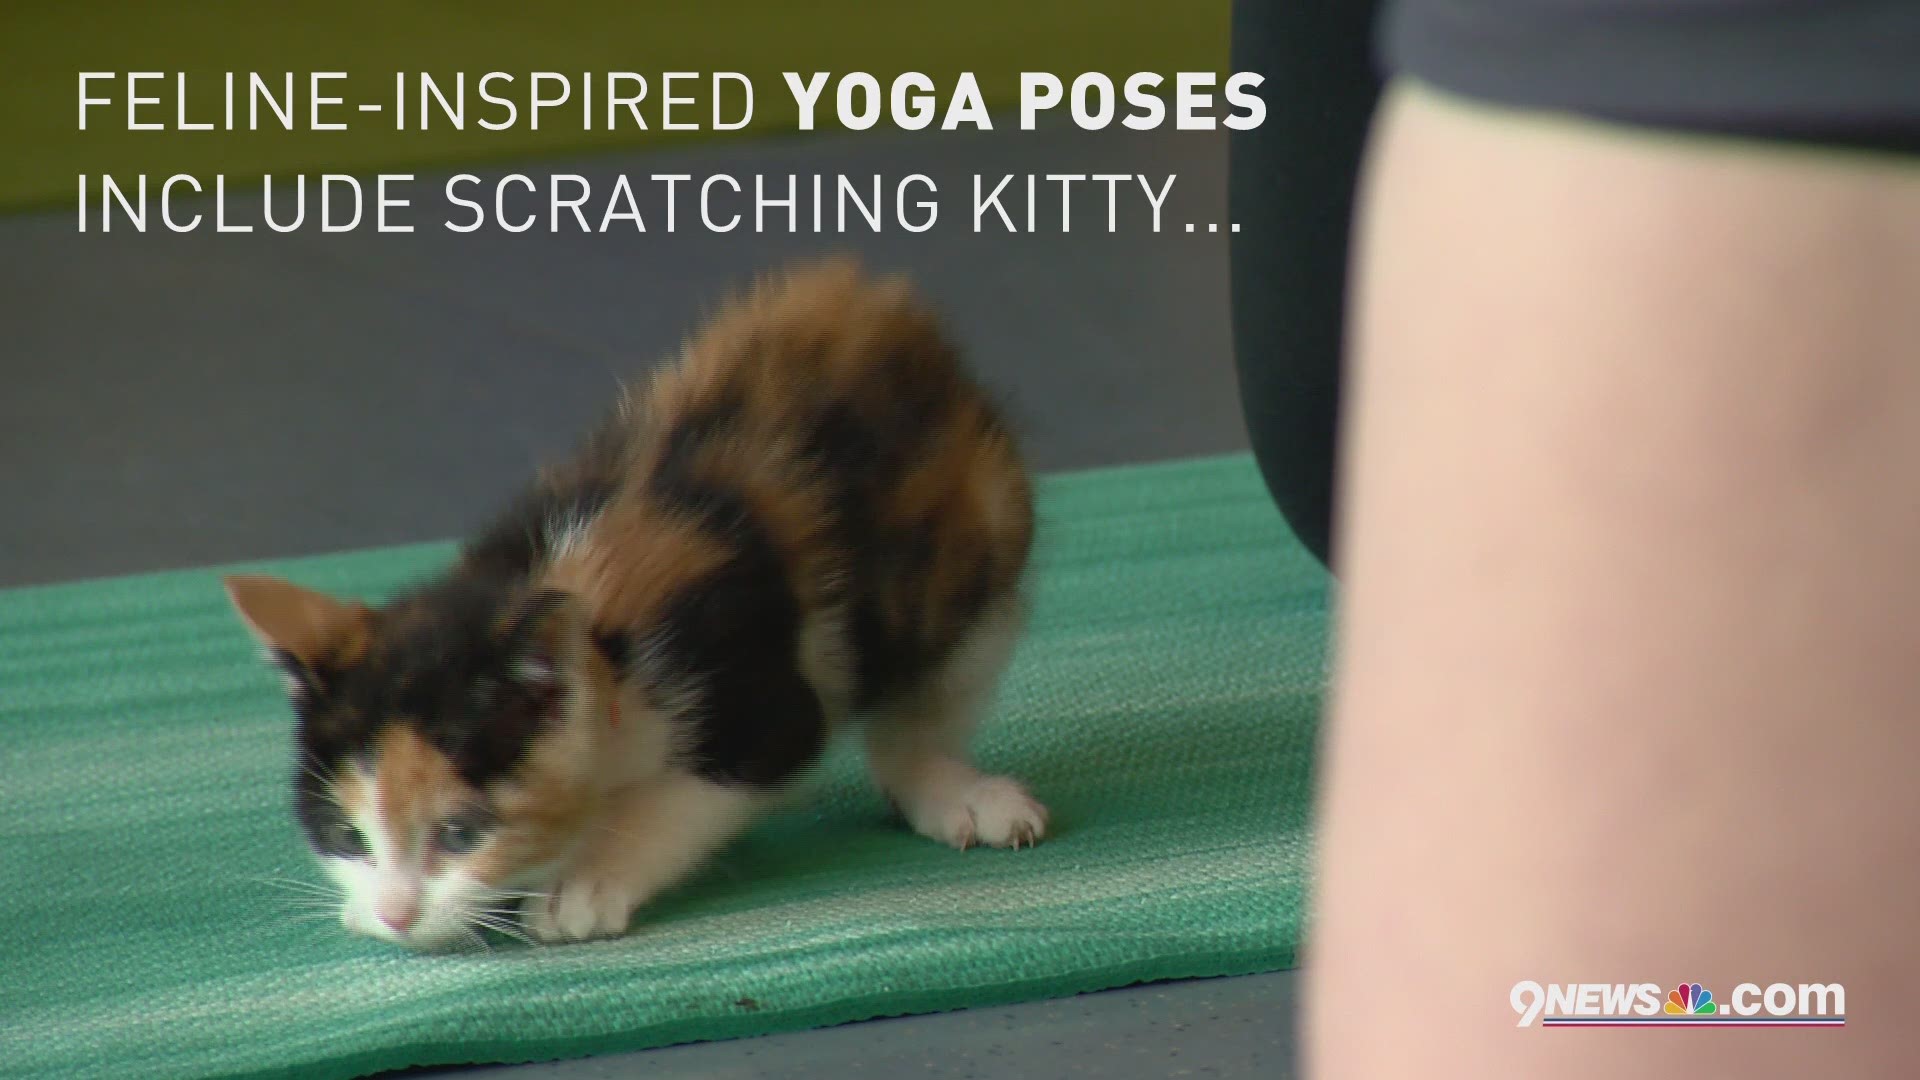 Denver Animal Shelter holds yoga classes with adoptable kittens and you can join! 9NEWS. 4/19/16.